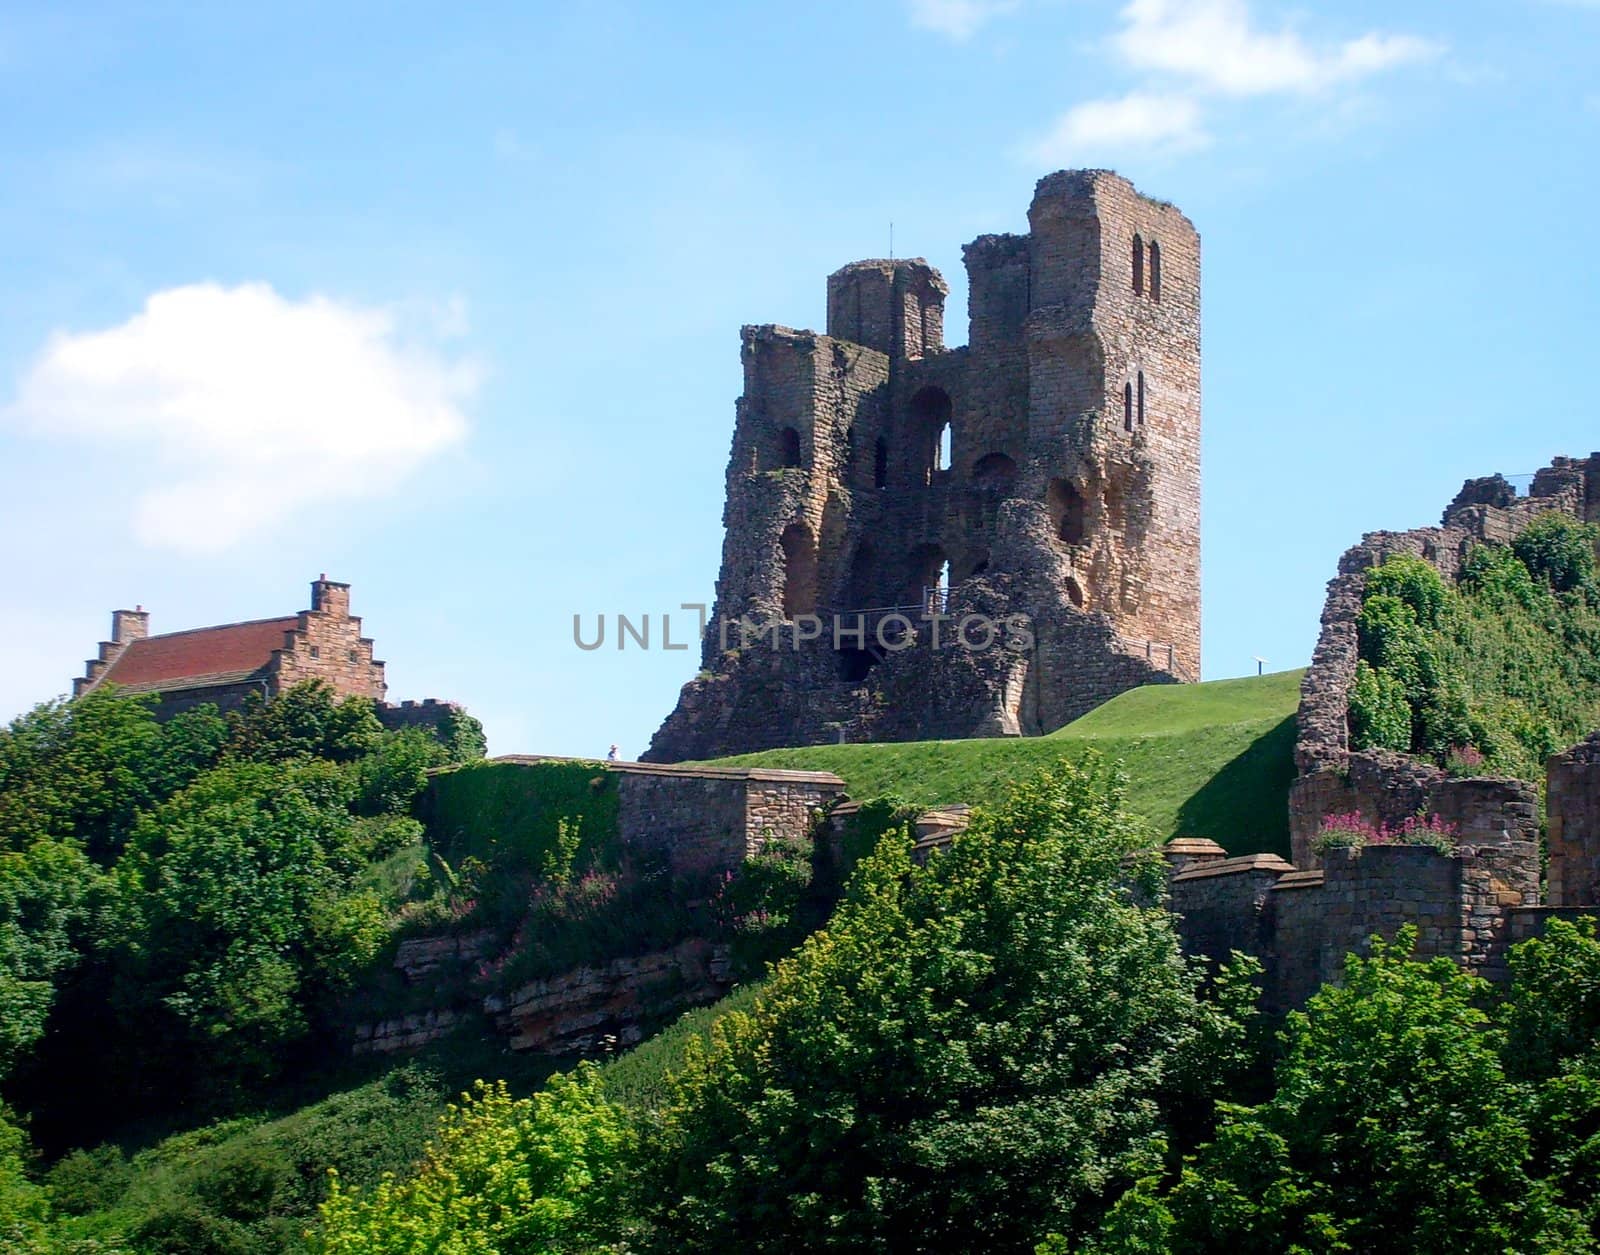 View of Scarborough's Norman Castle remains on castle headland, Scarborough, North Yorkshire, England.